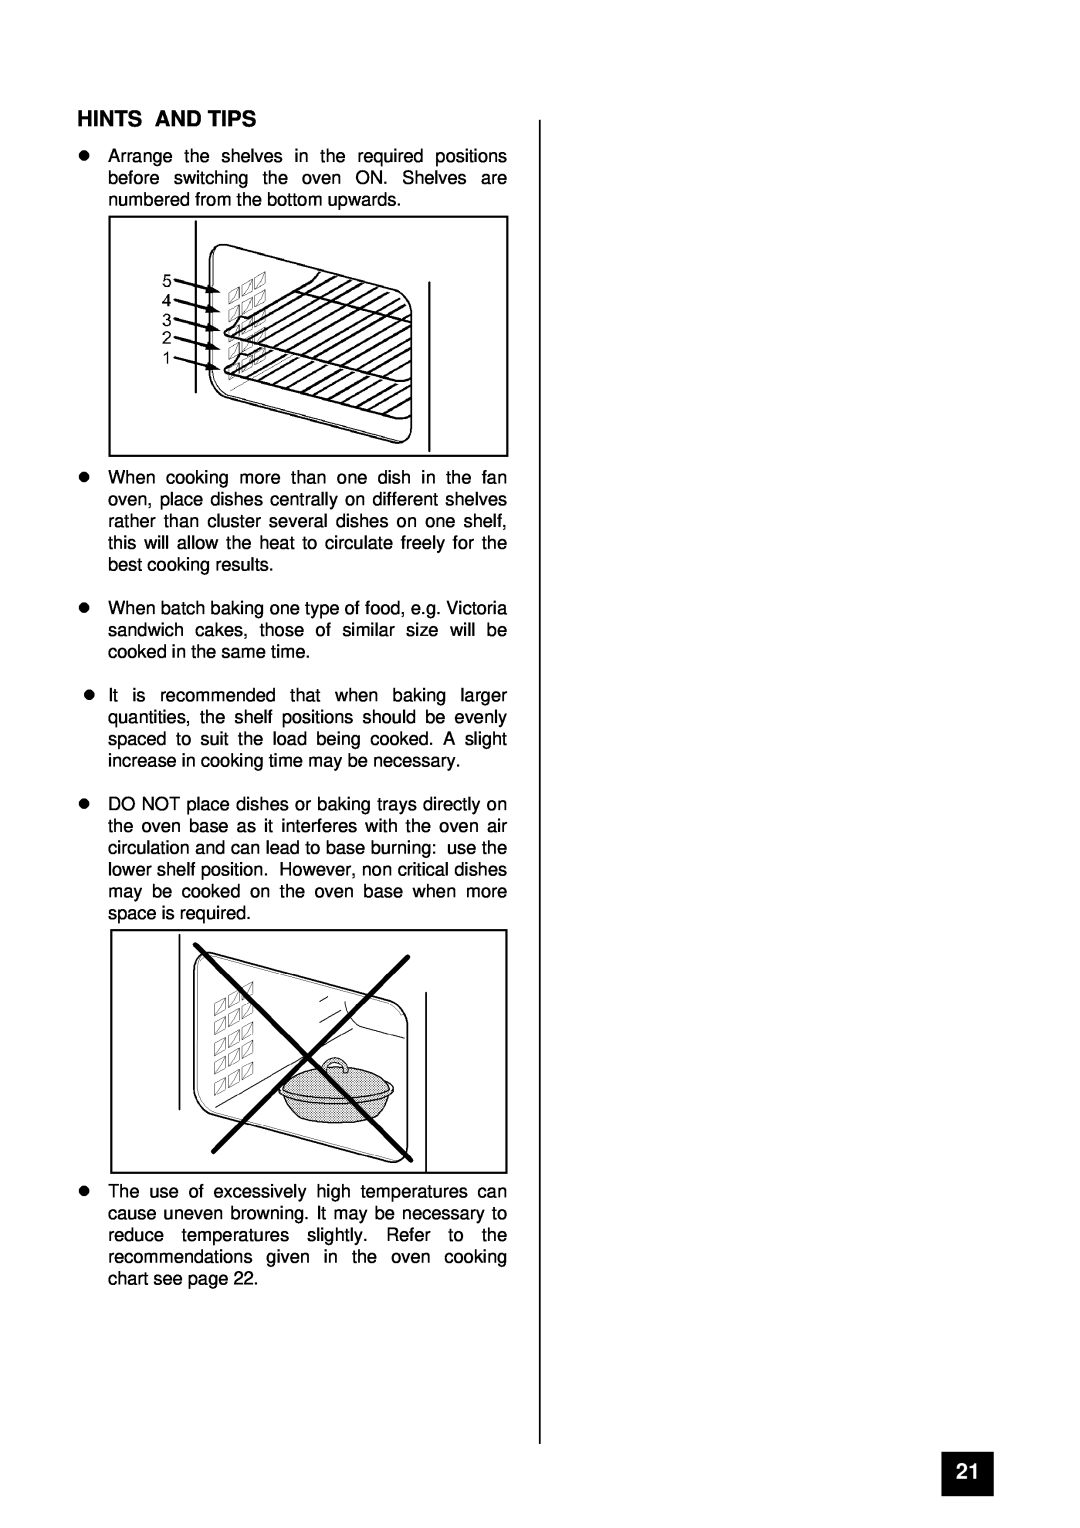 Zanussi ZCE ID manual lHINTS AND TIPS, lincrease in cooking time may be necessary 